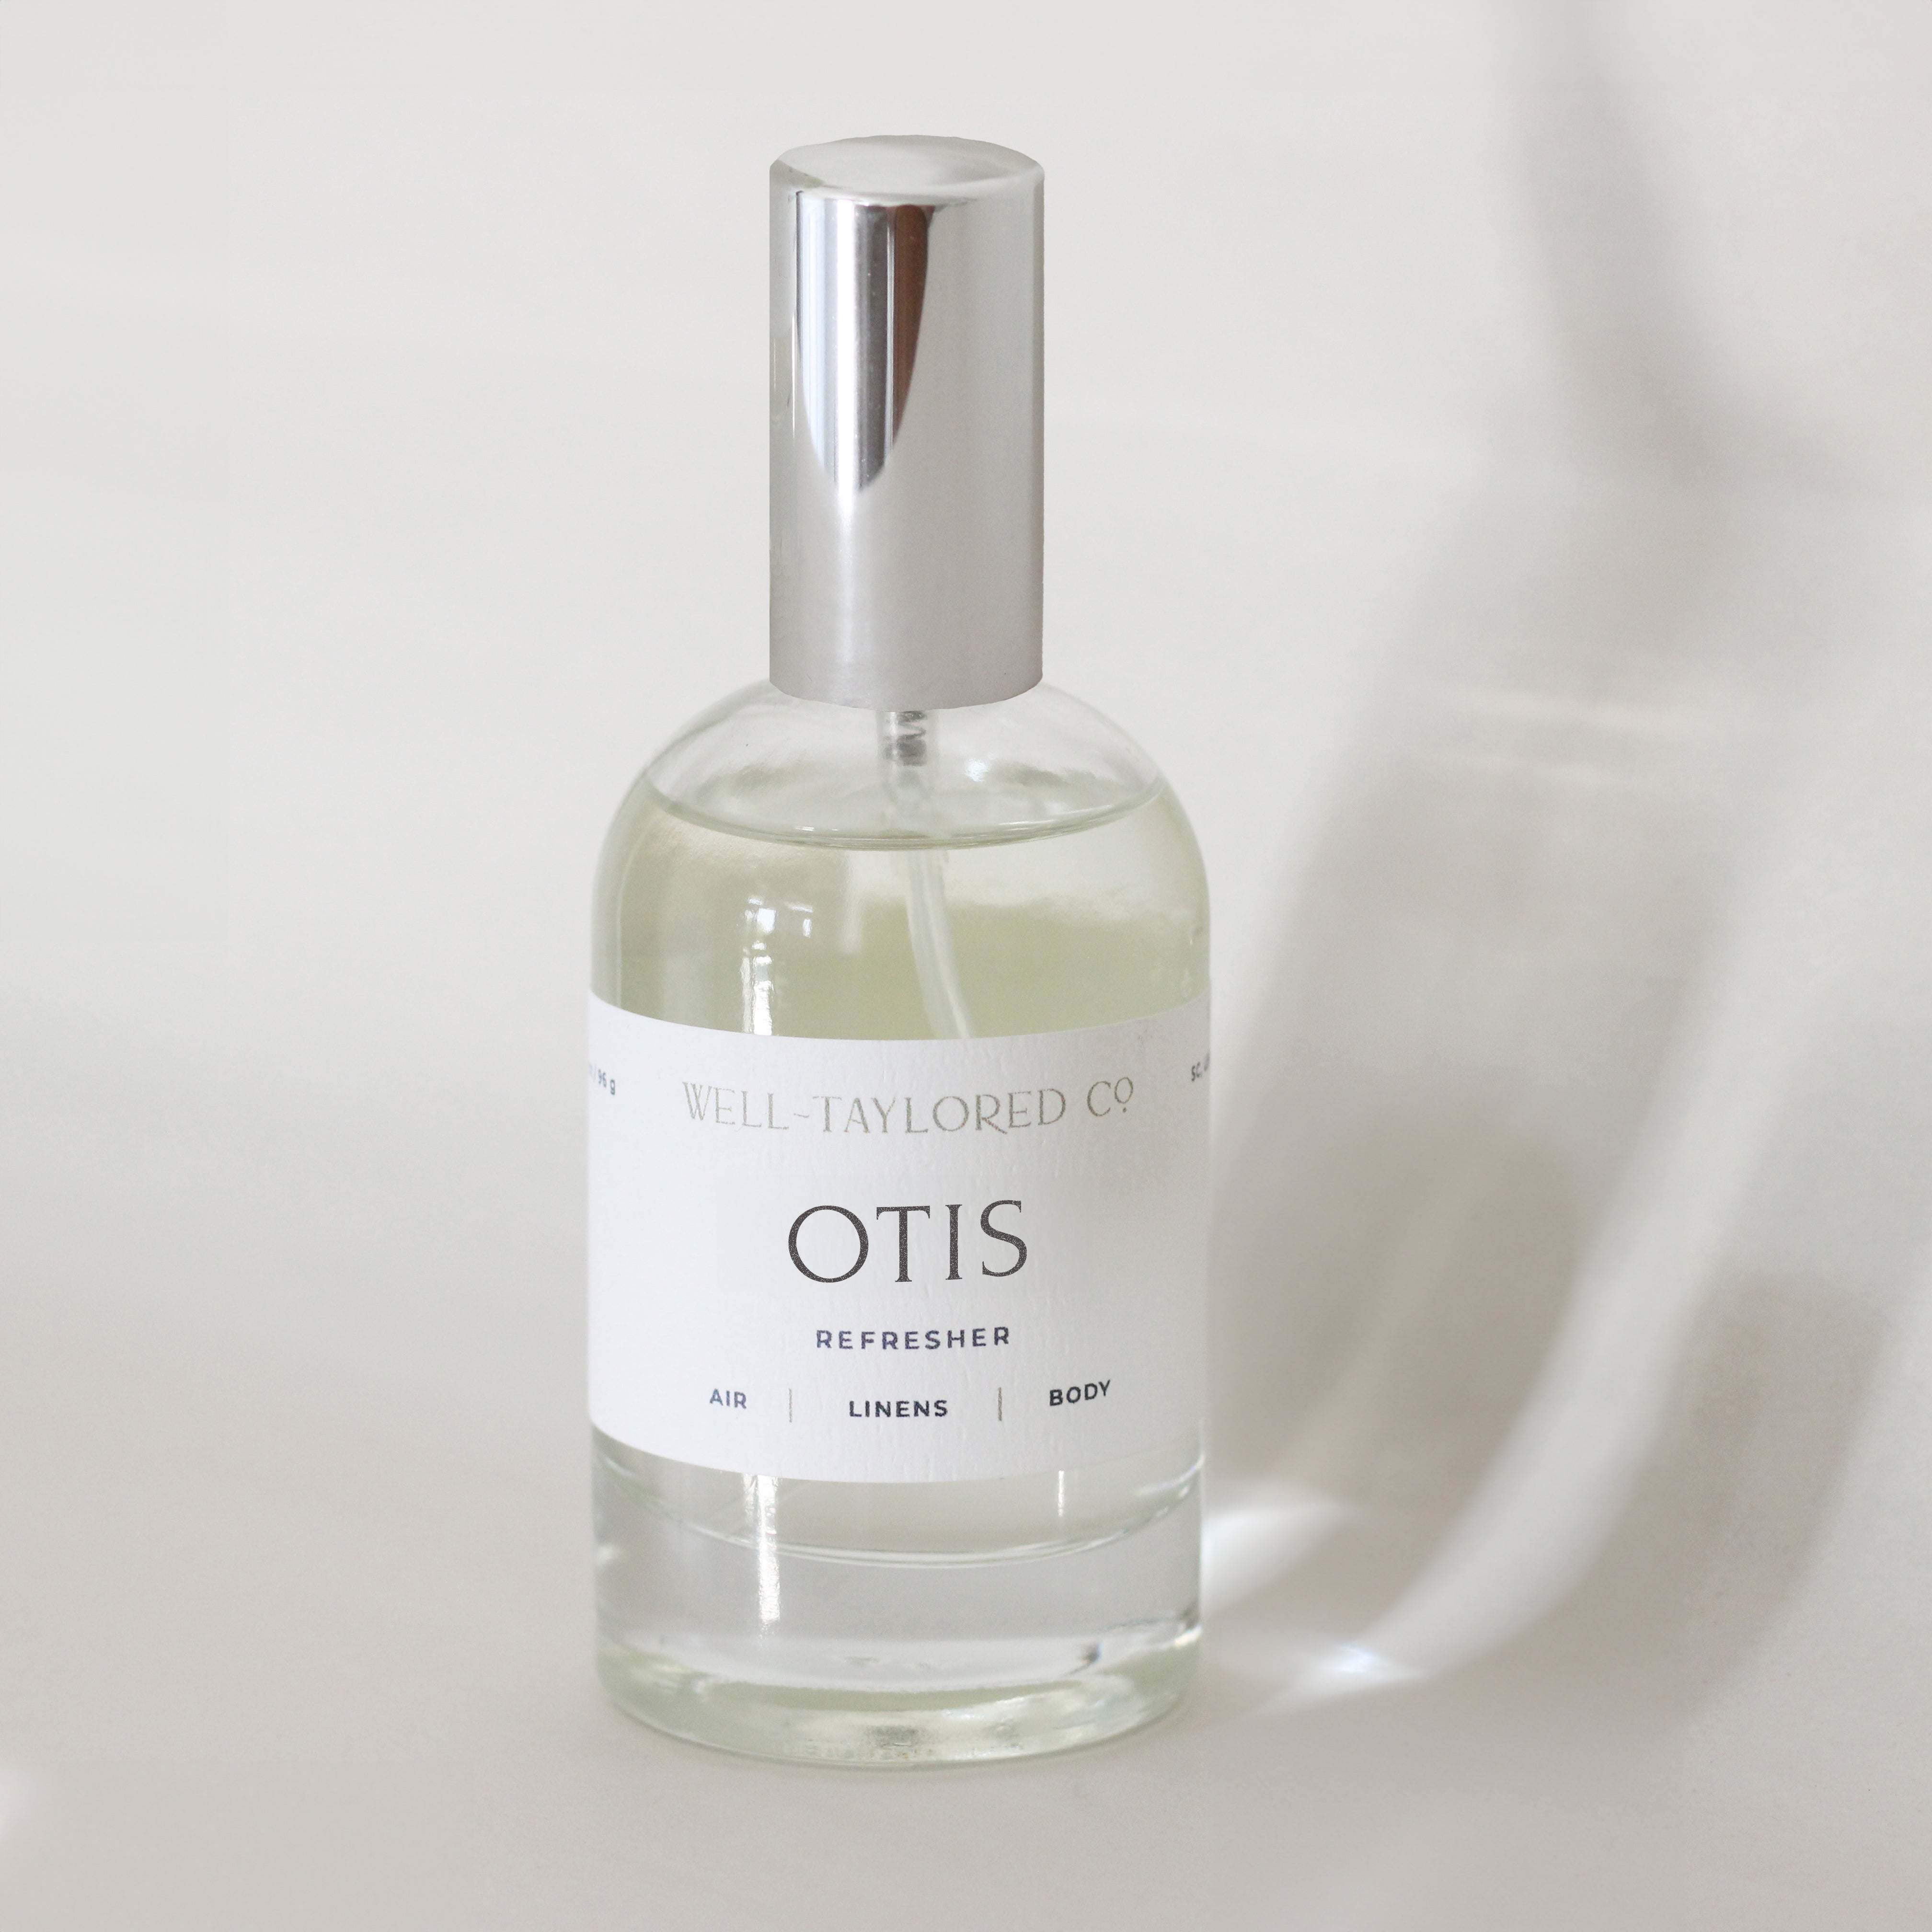 Otis Air & Linen Refresher | Well-Taylored Co.